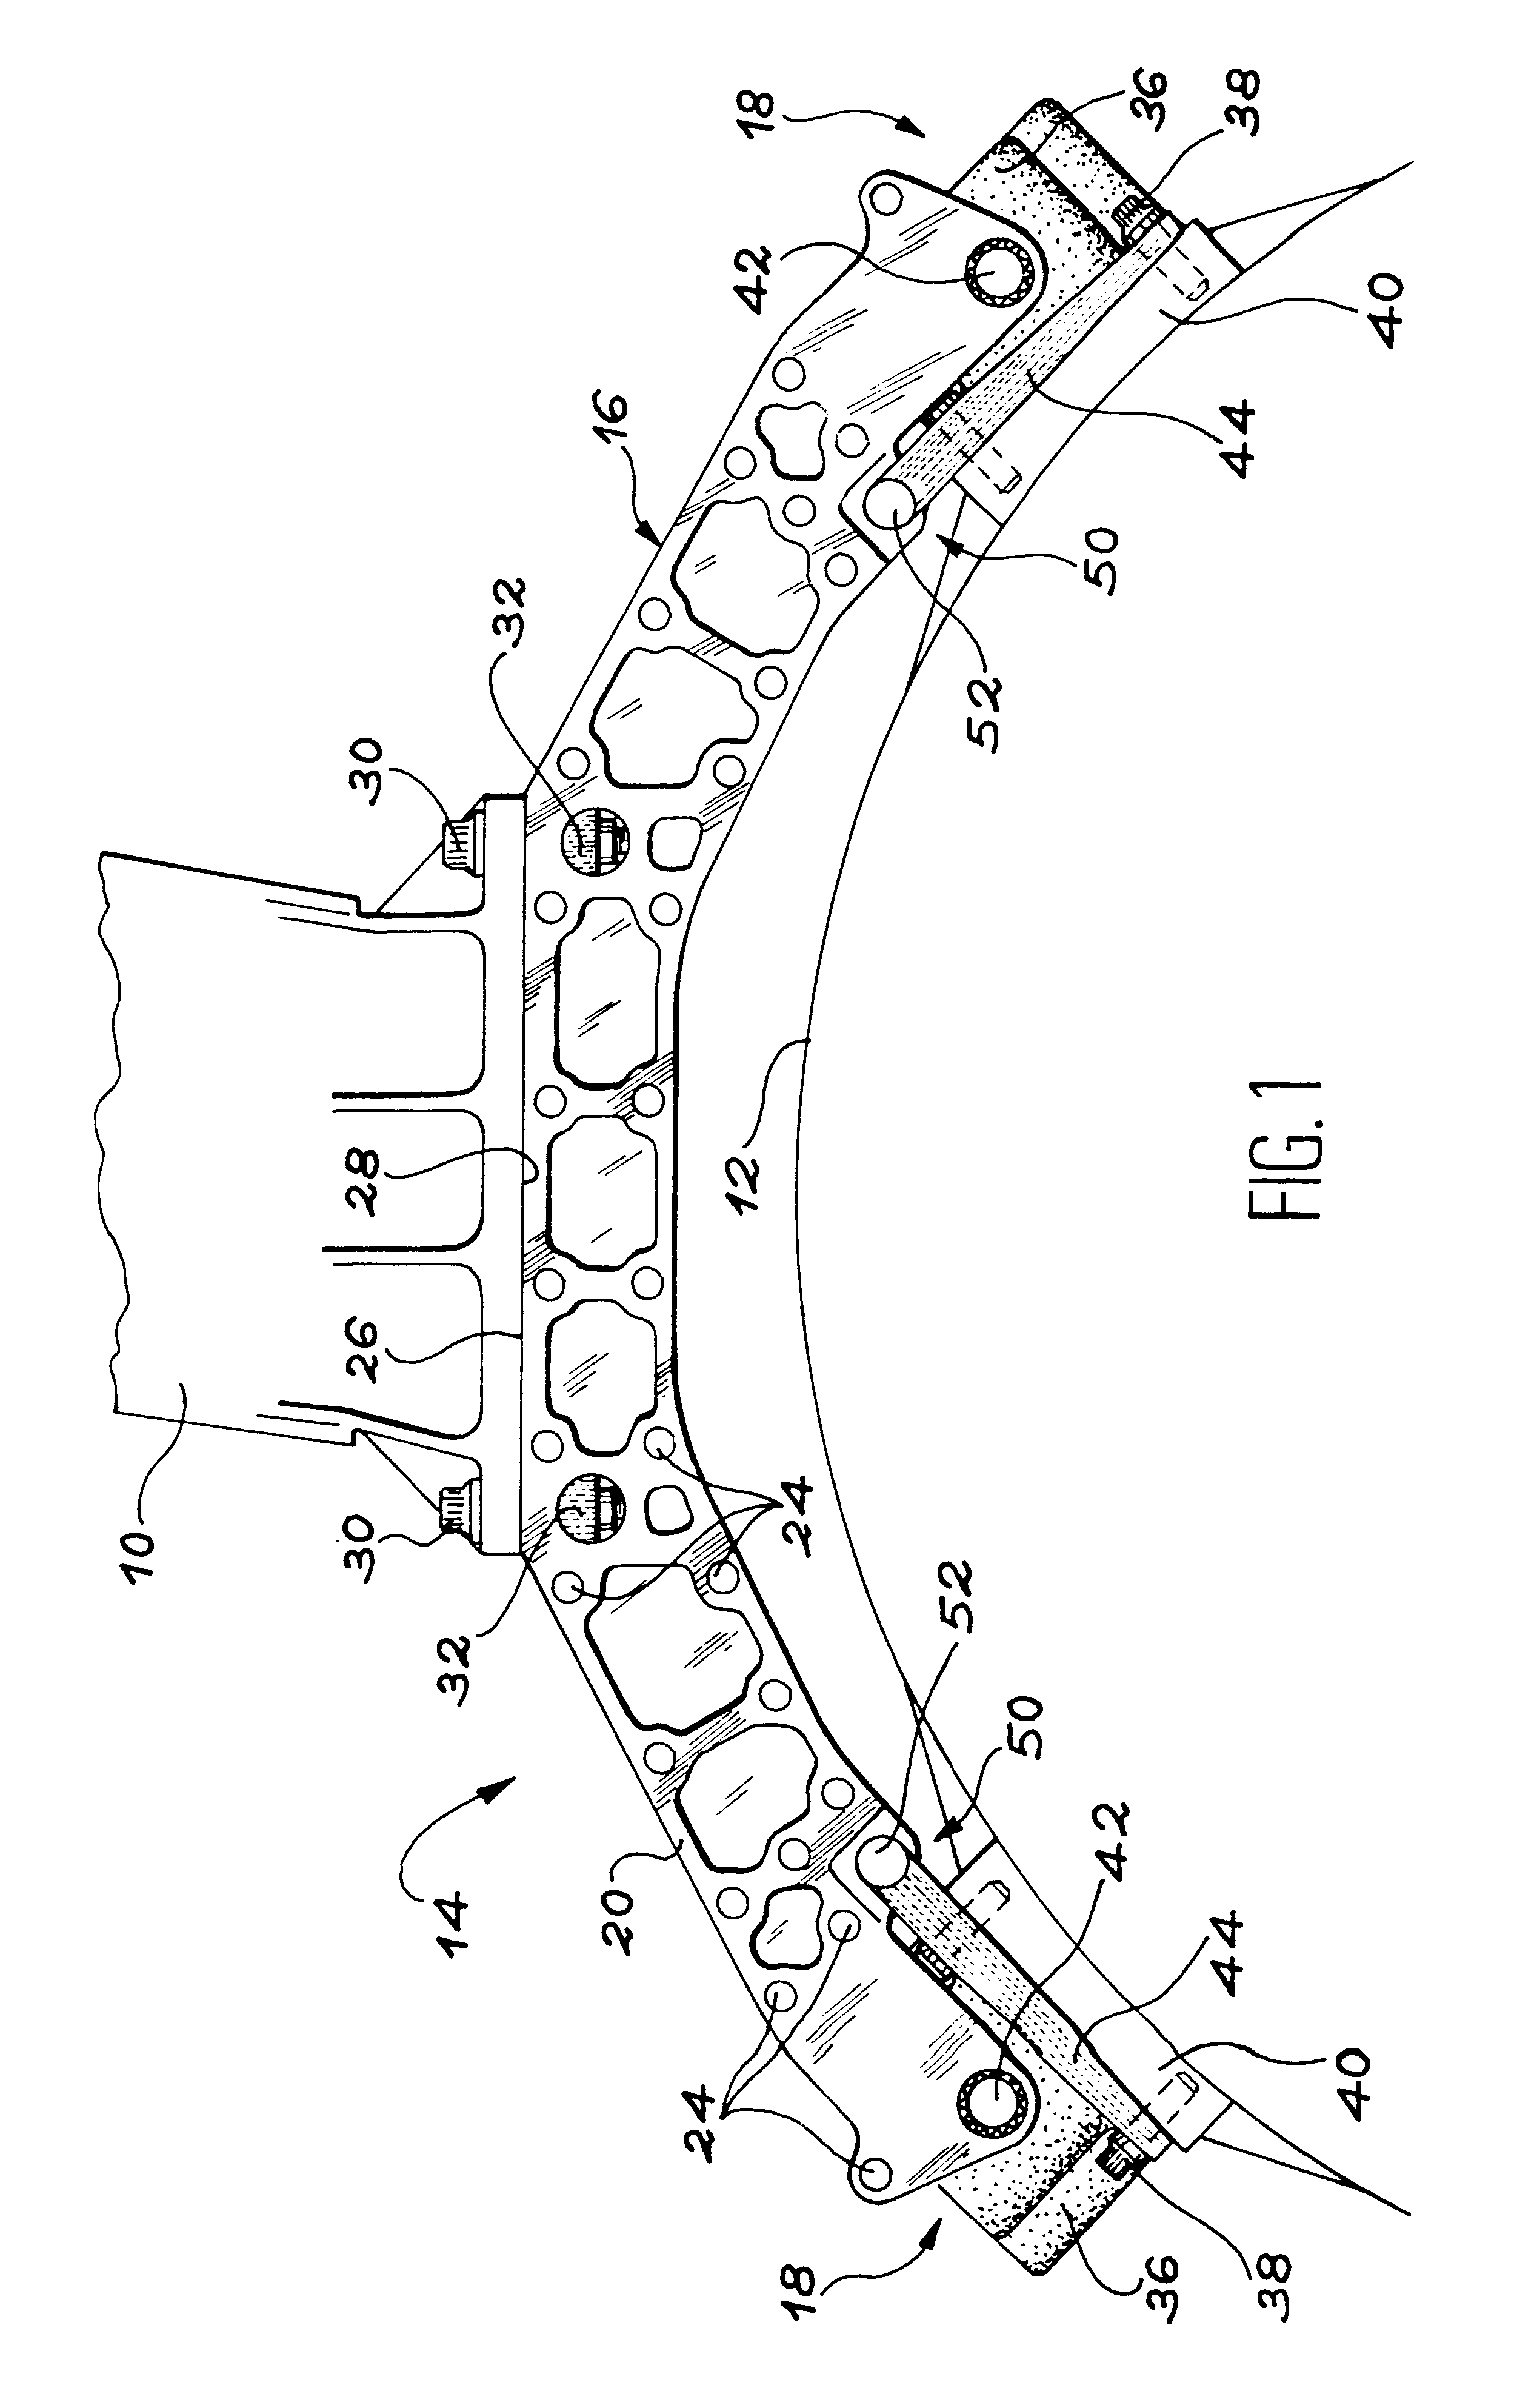 Device for attaching an engine to an aircraft strut